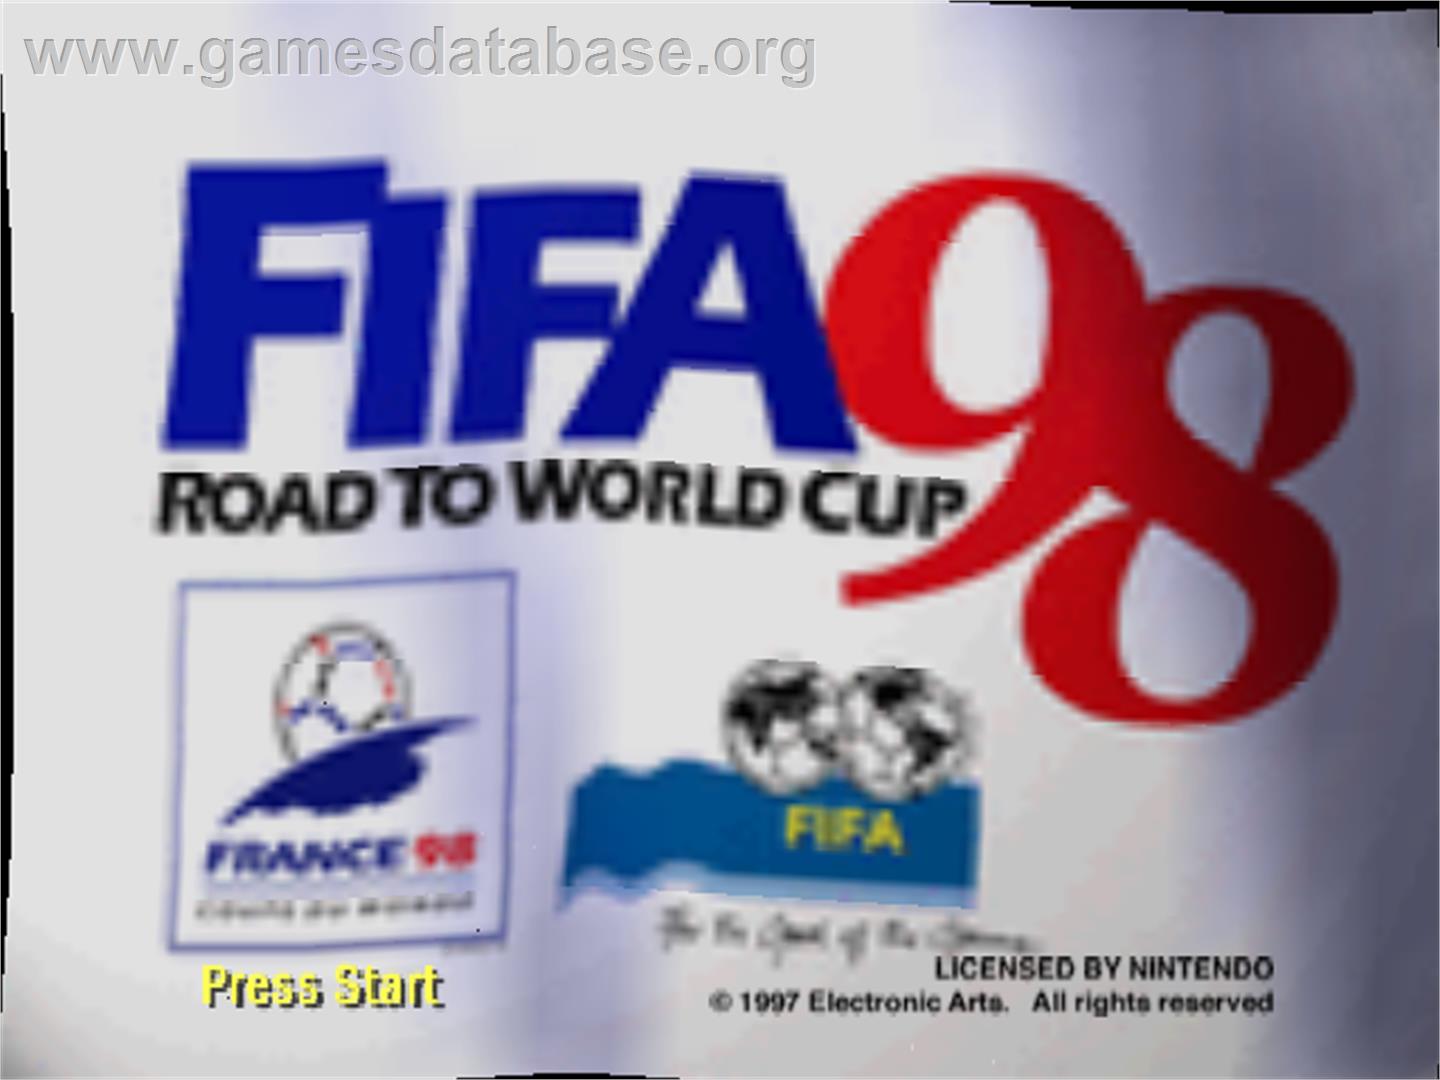 FIFA 98: Road to World Cup - Nintendo N64 - Artwork - Title Screen